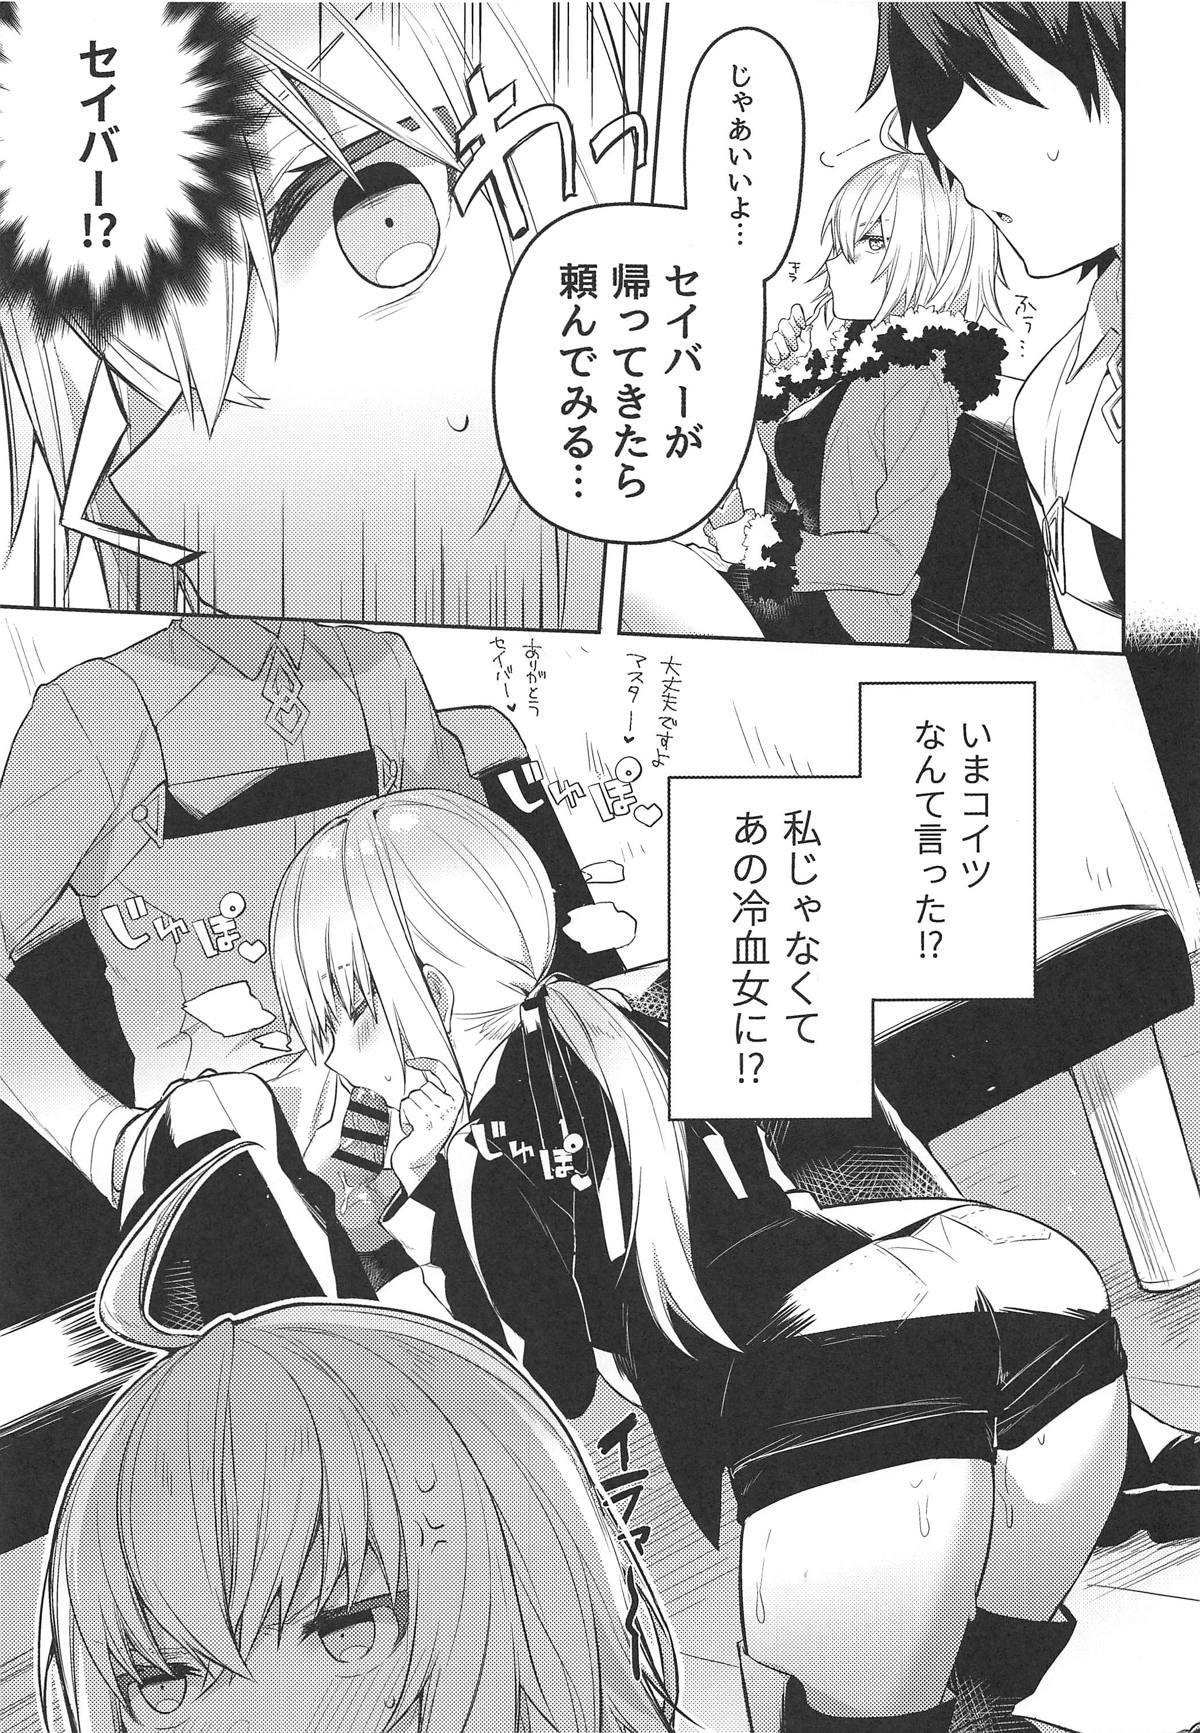 Oldyoung Shinjuku Sneaking Mission - Fate grand order Messy - Page 4